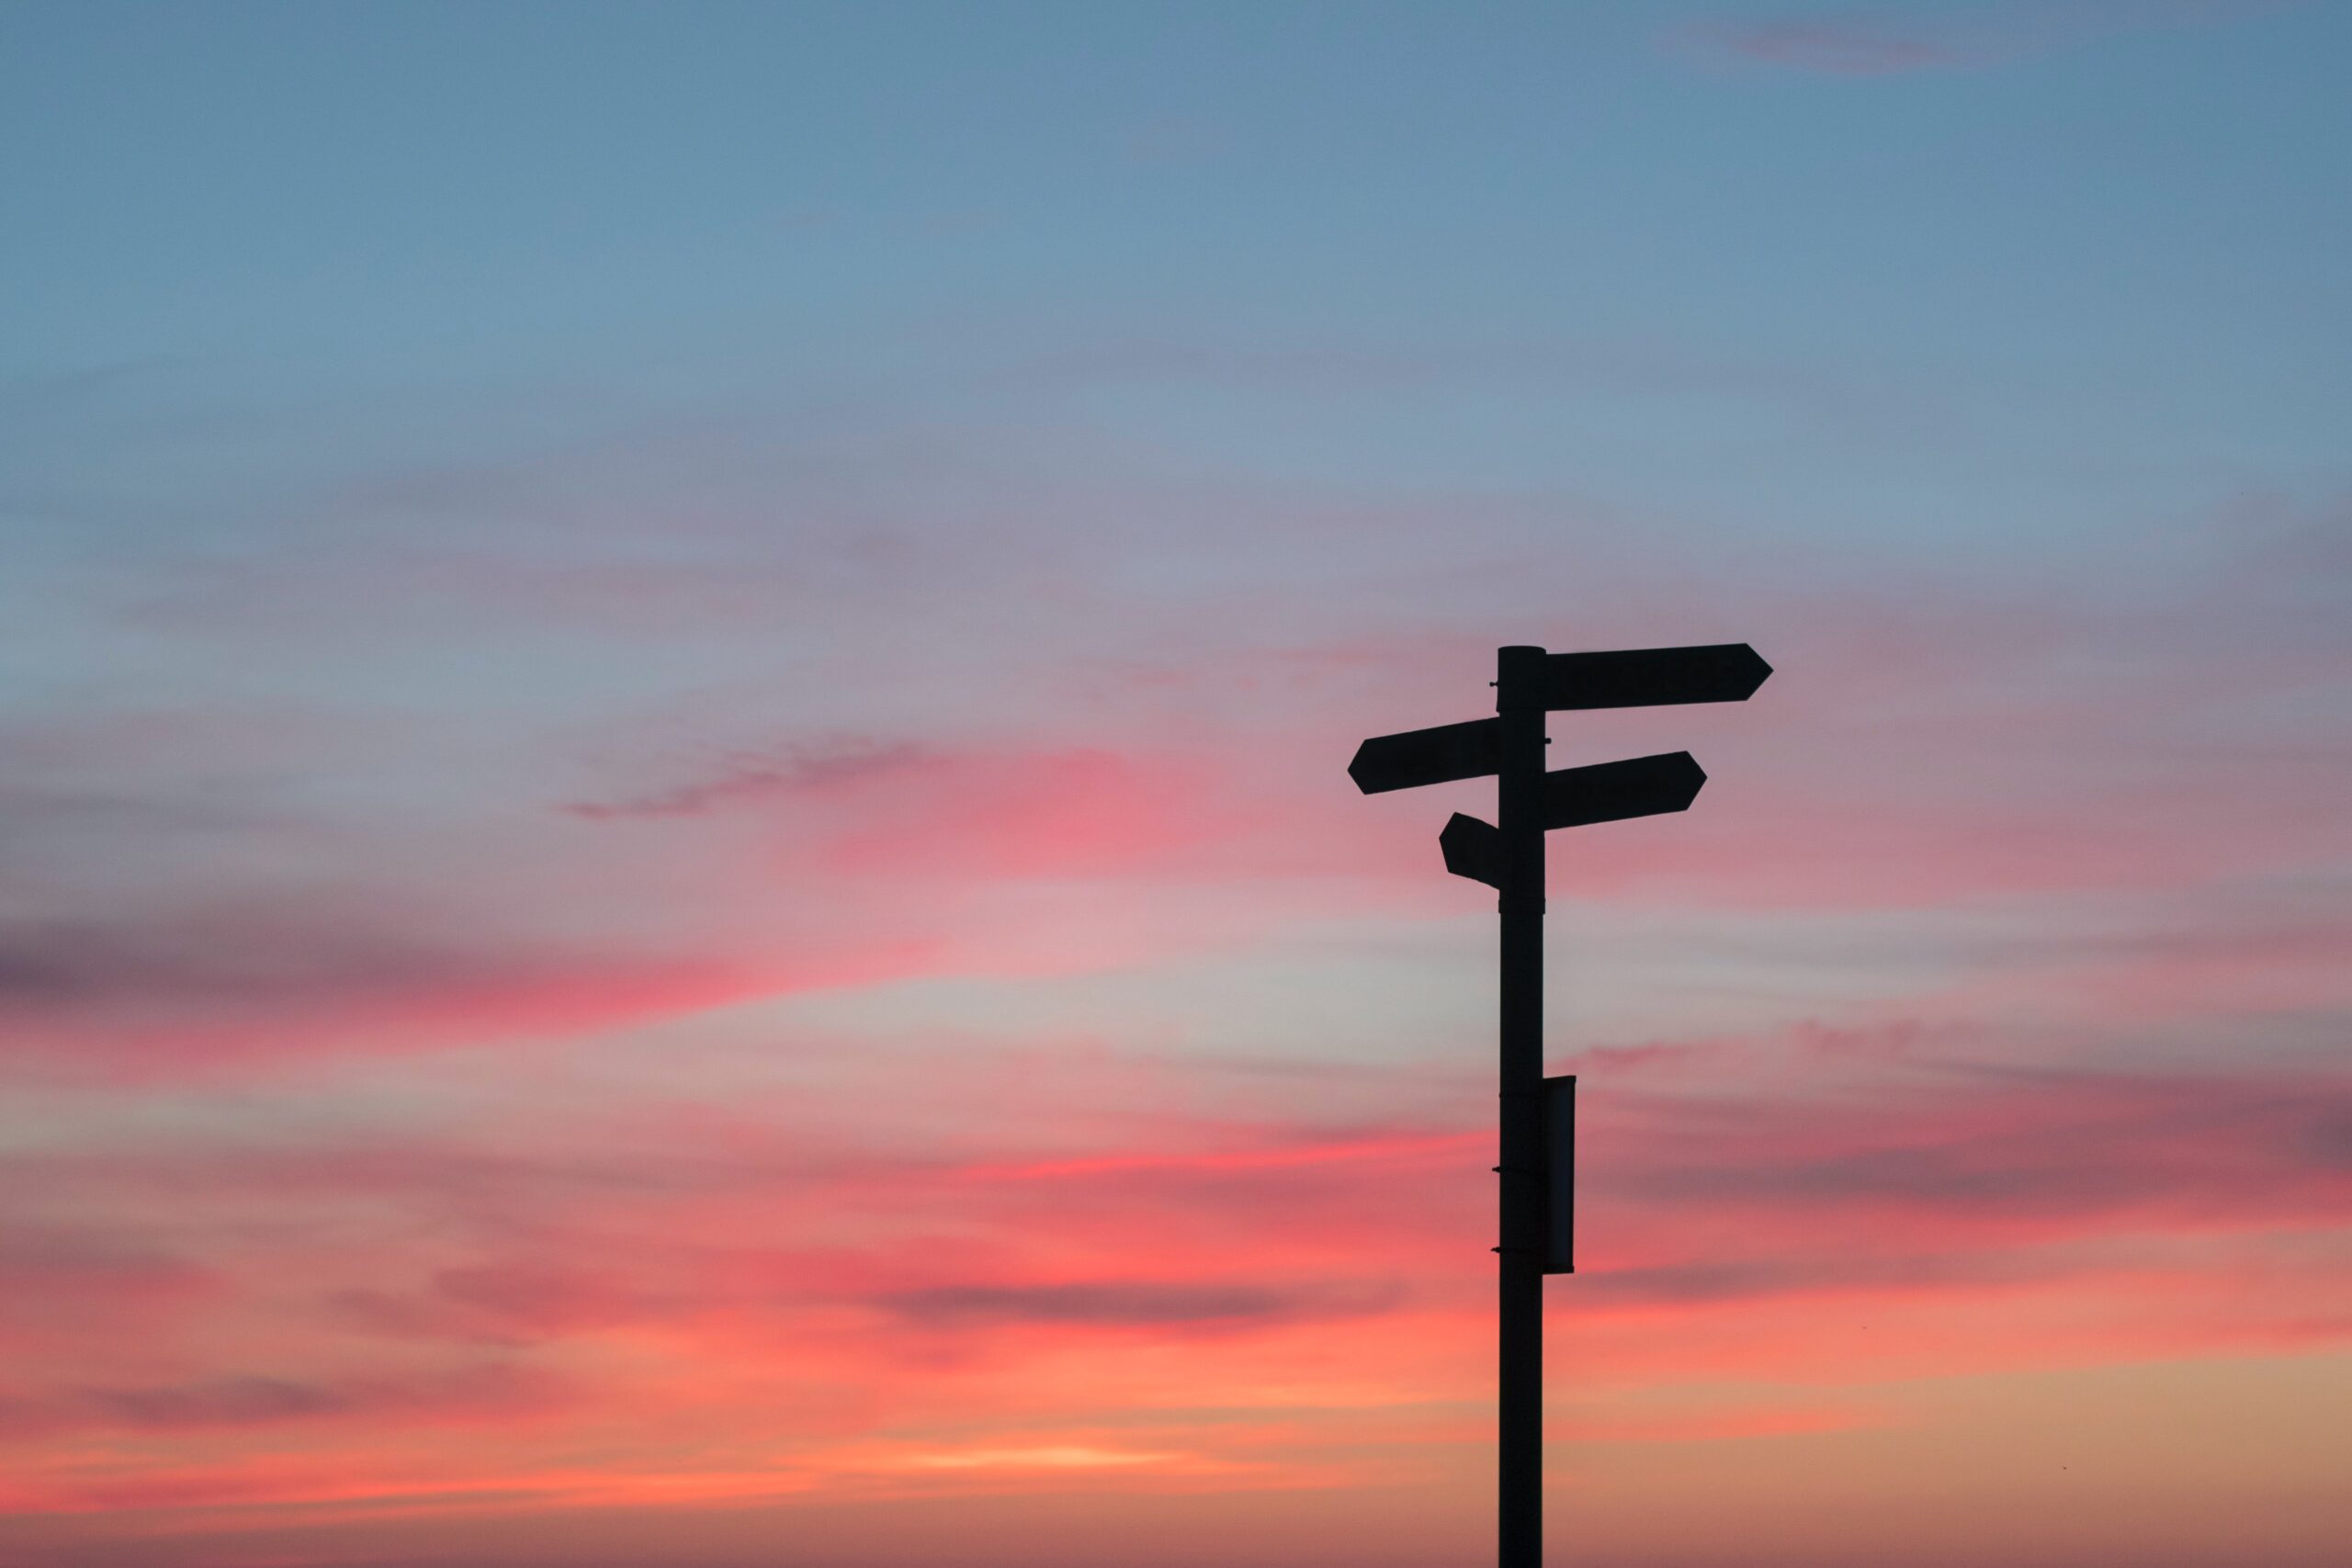 An arrow signpost with four directions in front of a sunset sky, indicating many potential member journeys.